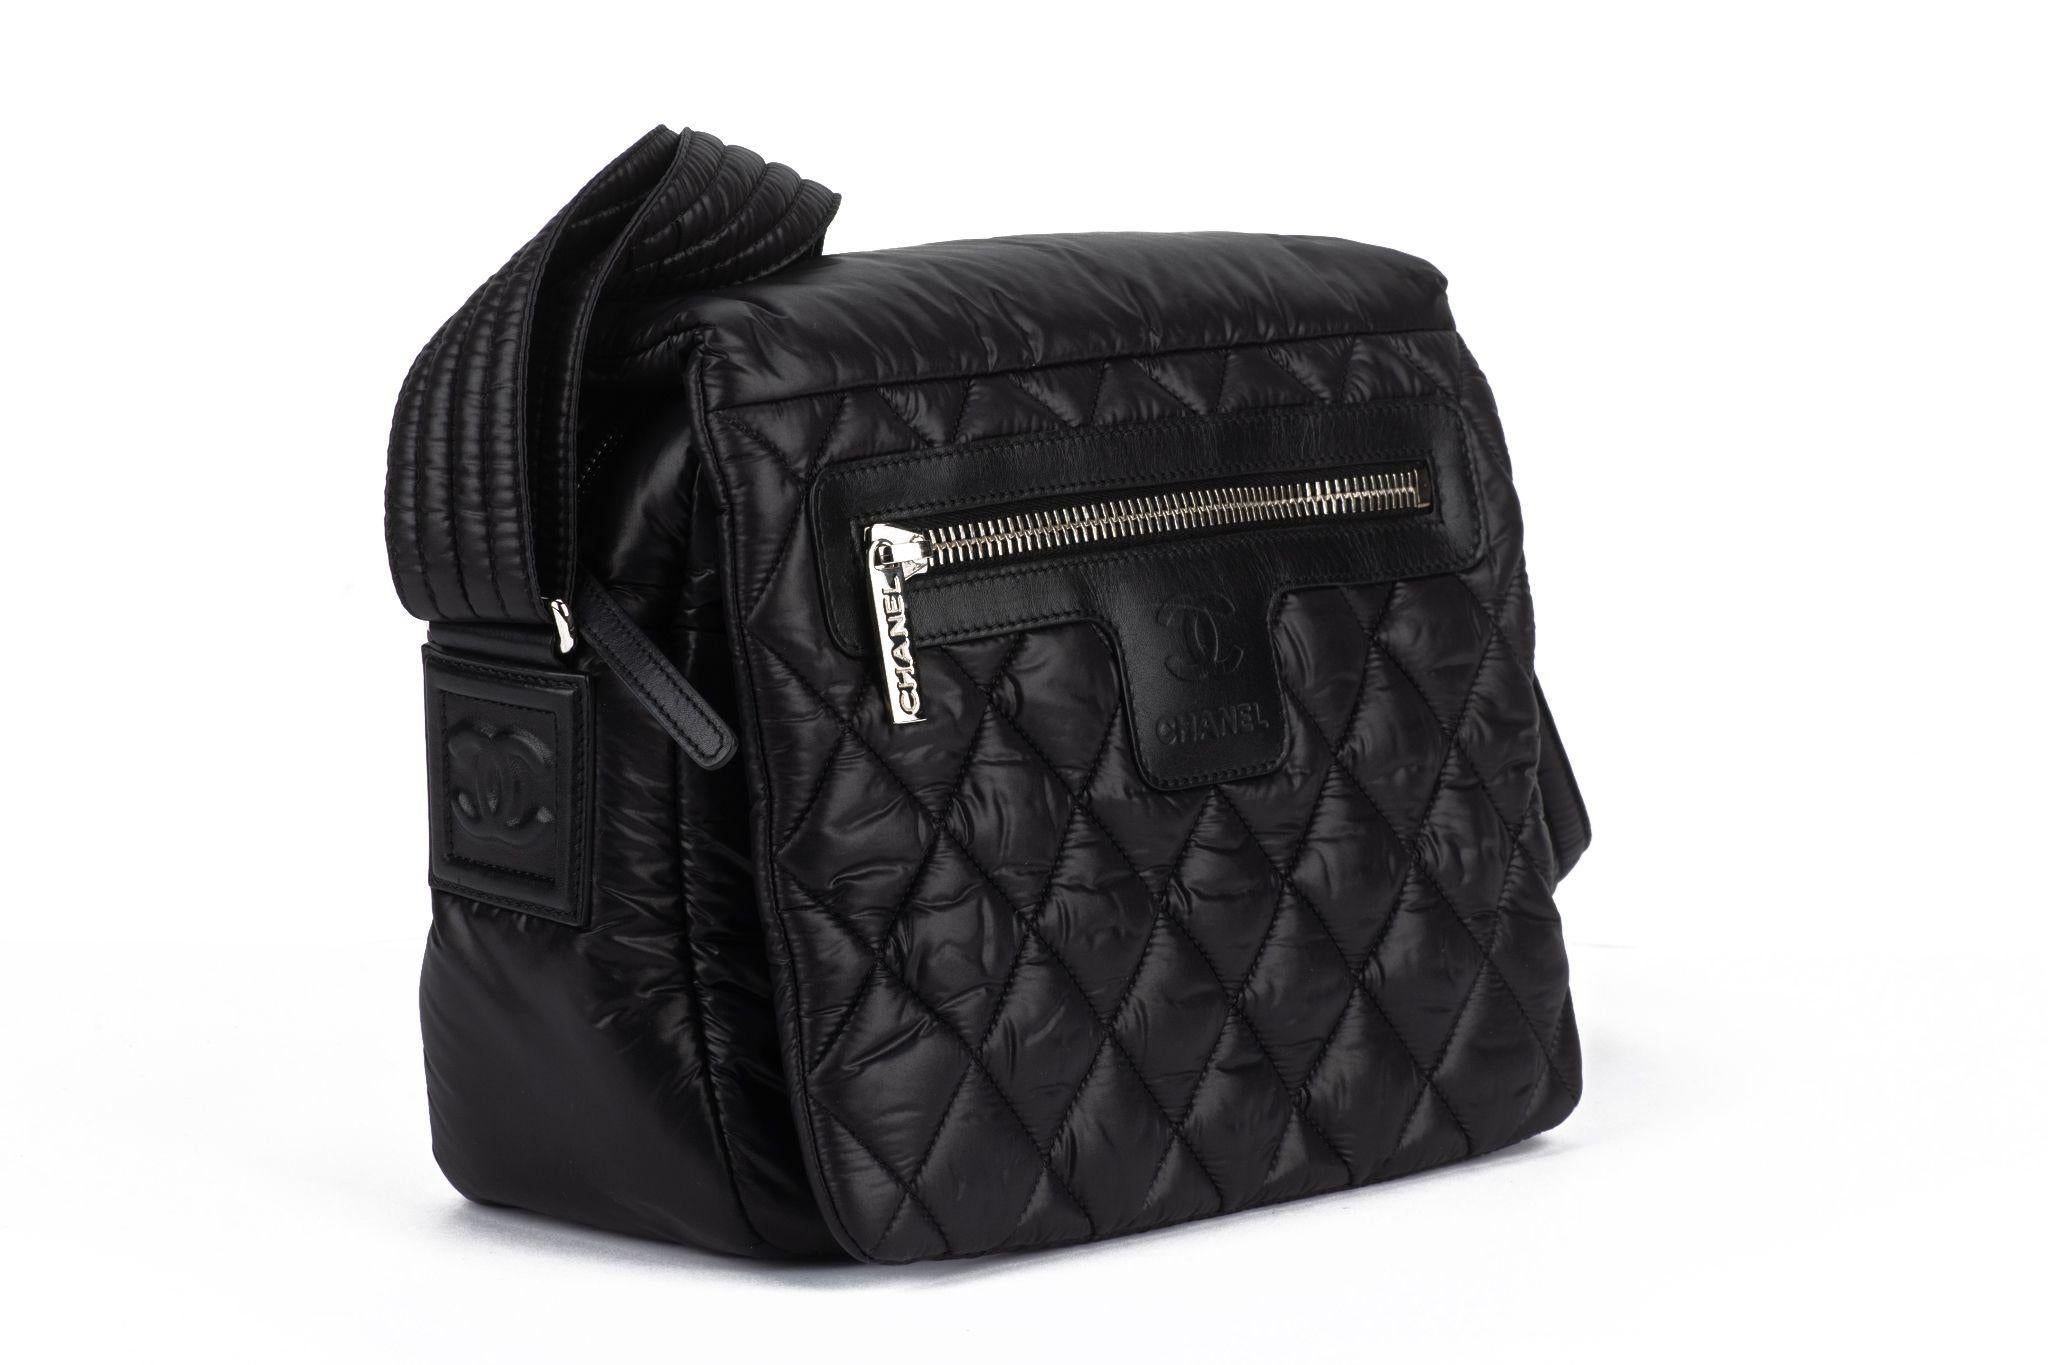 The Chanel Cocoon crossbody features diamond quilting leather, debased logo, single adjustable shoulder strap drop 13